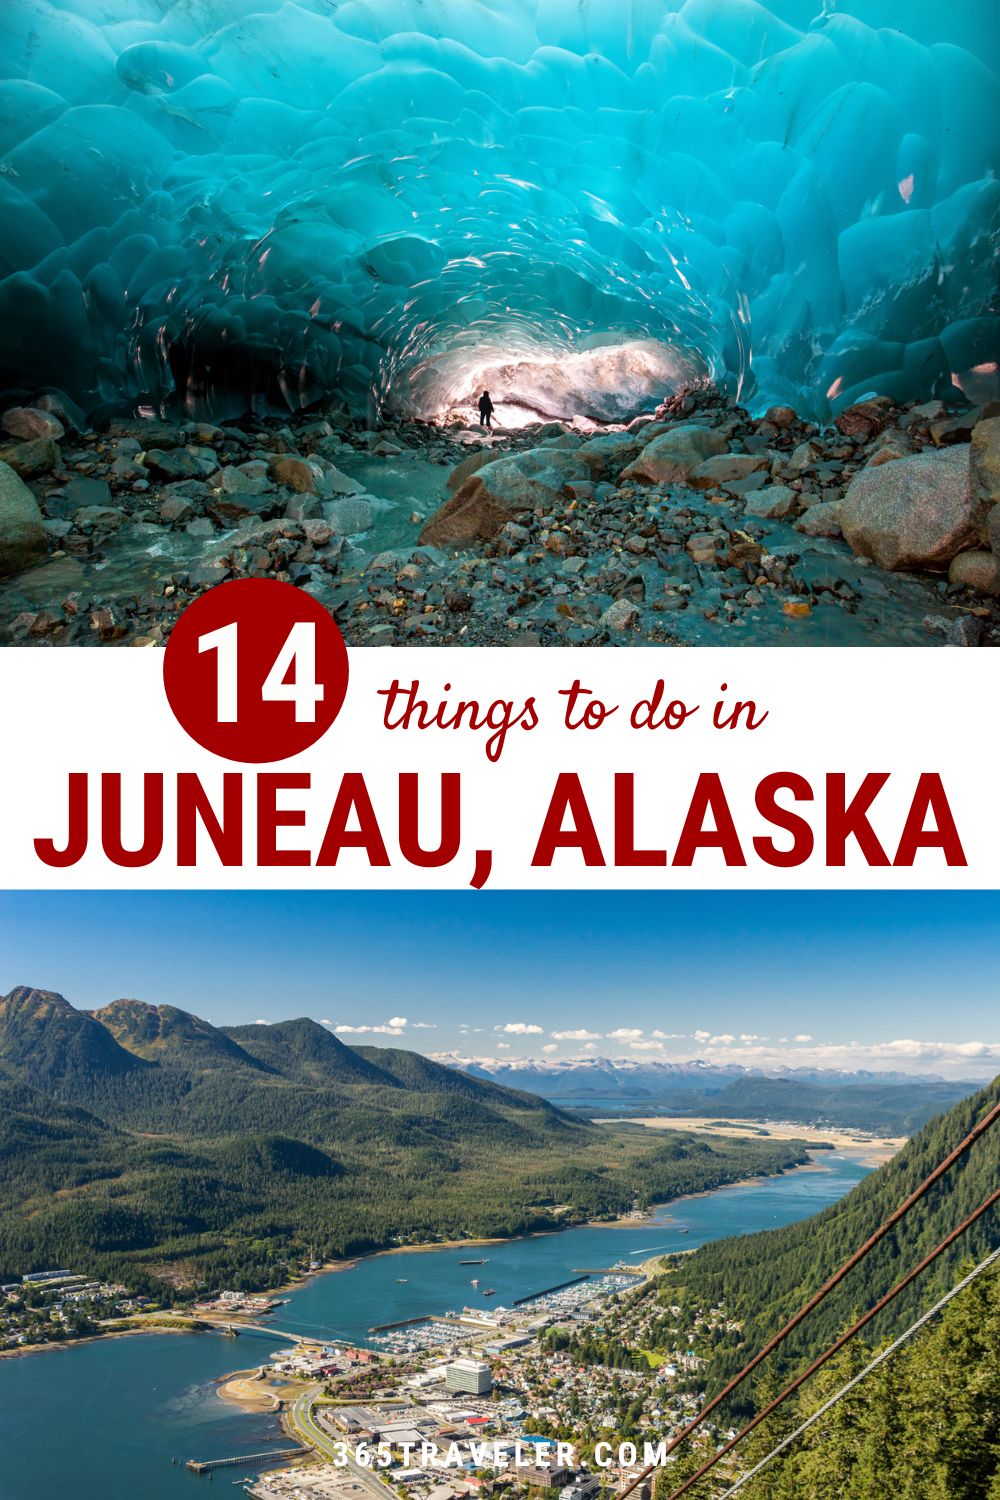 14 THINGS TO DO IN JUNEAU ALASKA YOU CAN'T MISS